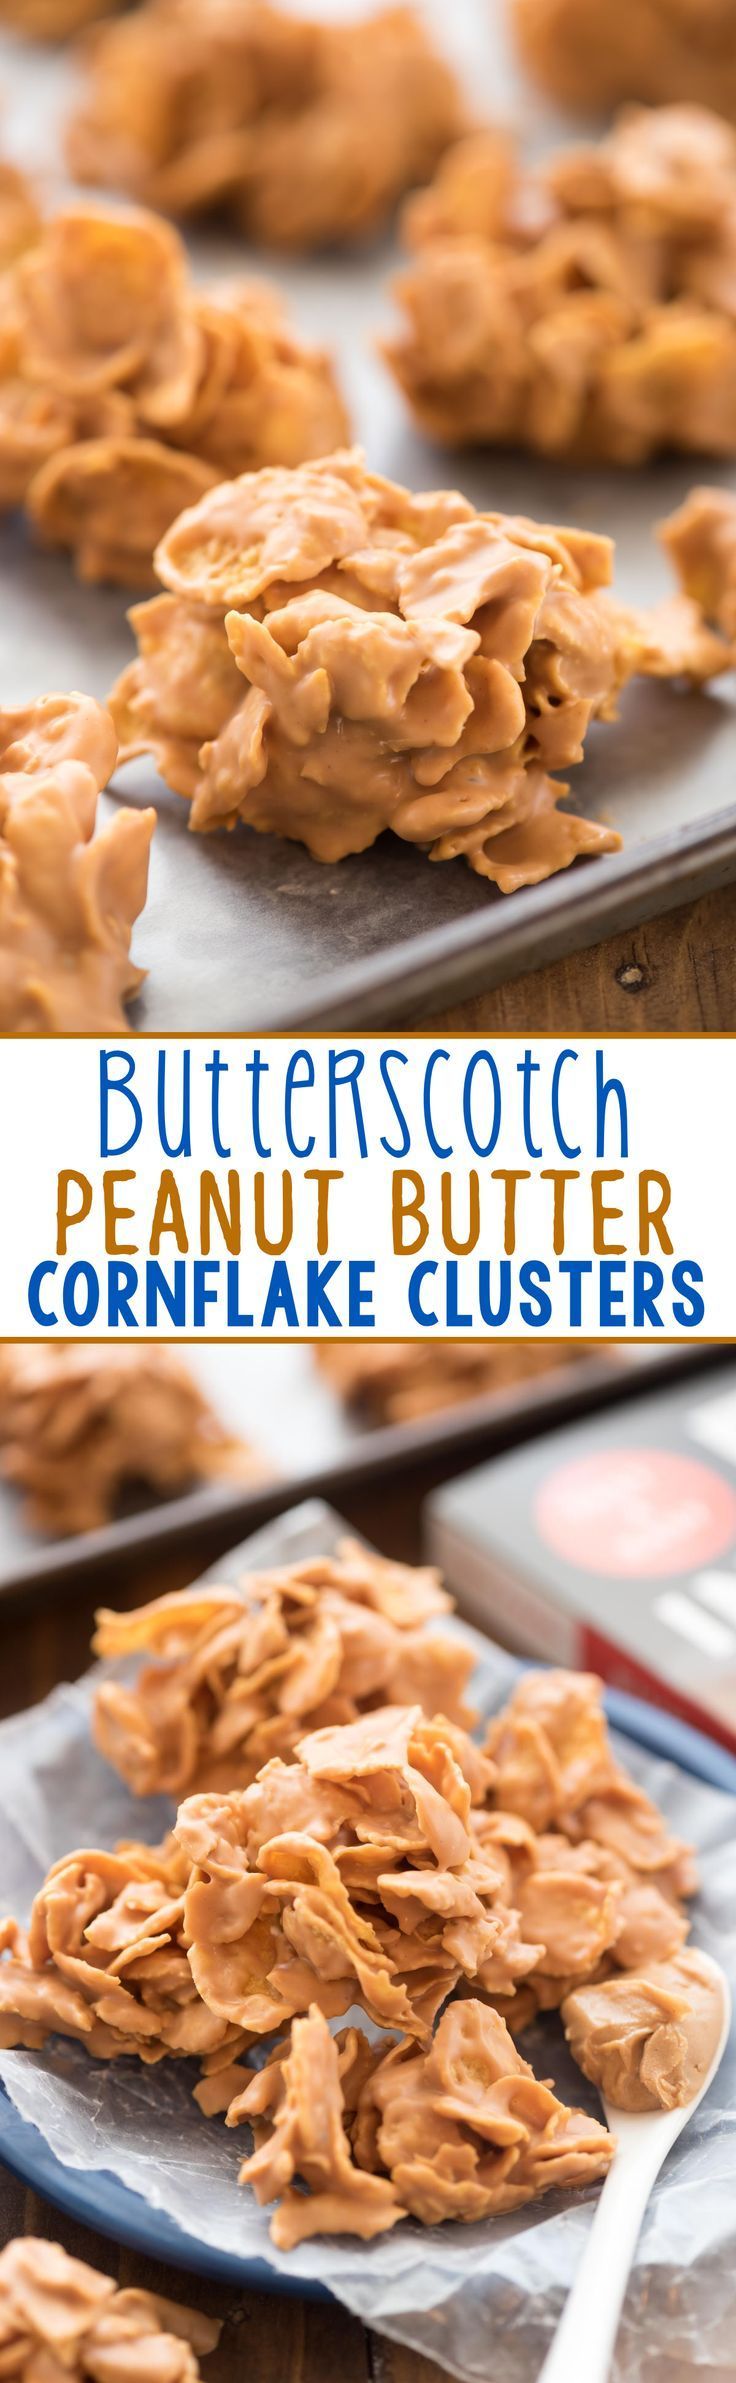 Butterscotch Peanut Butter Cornflake Clusters – this easy candy recipe has only…